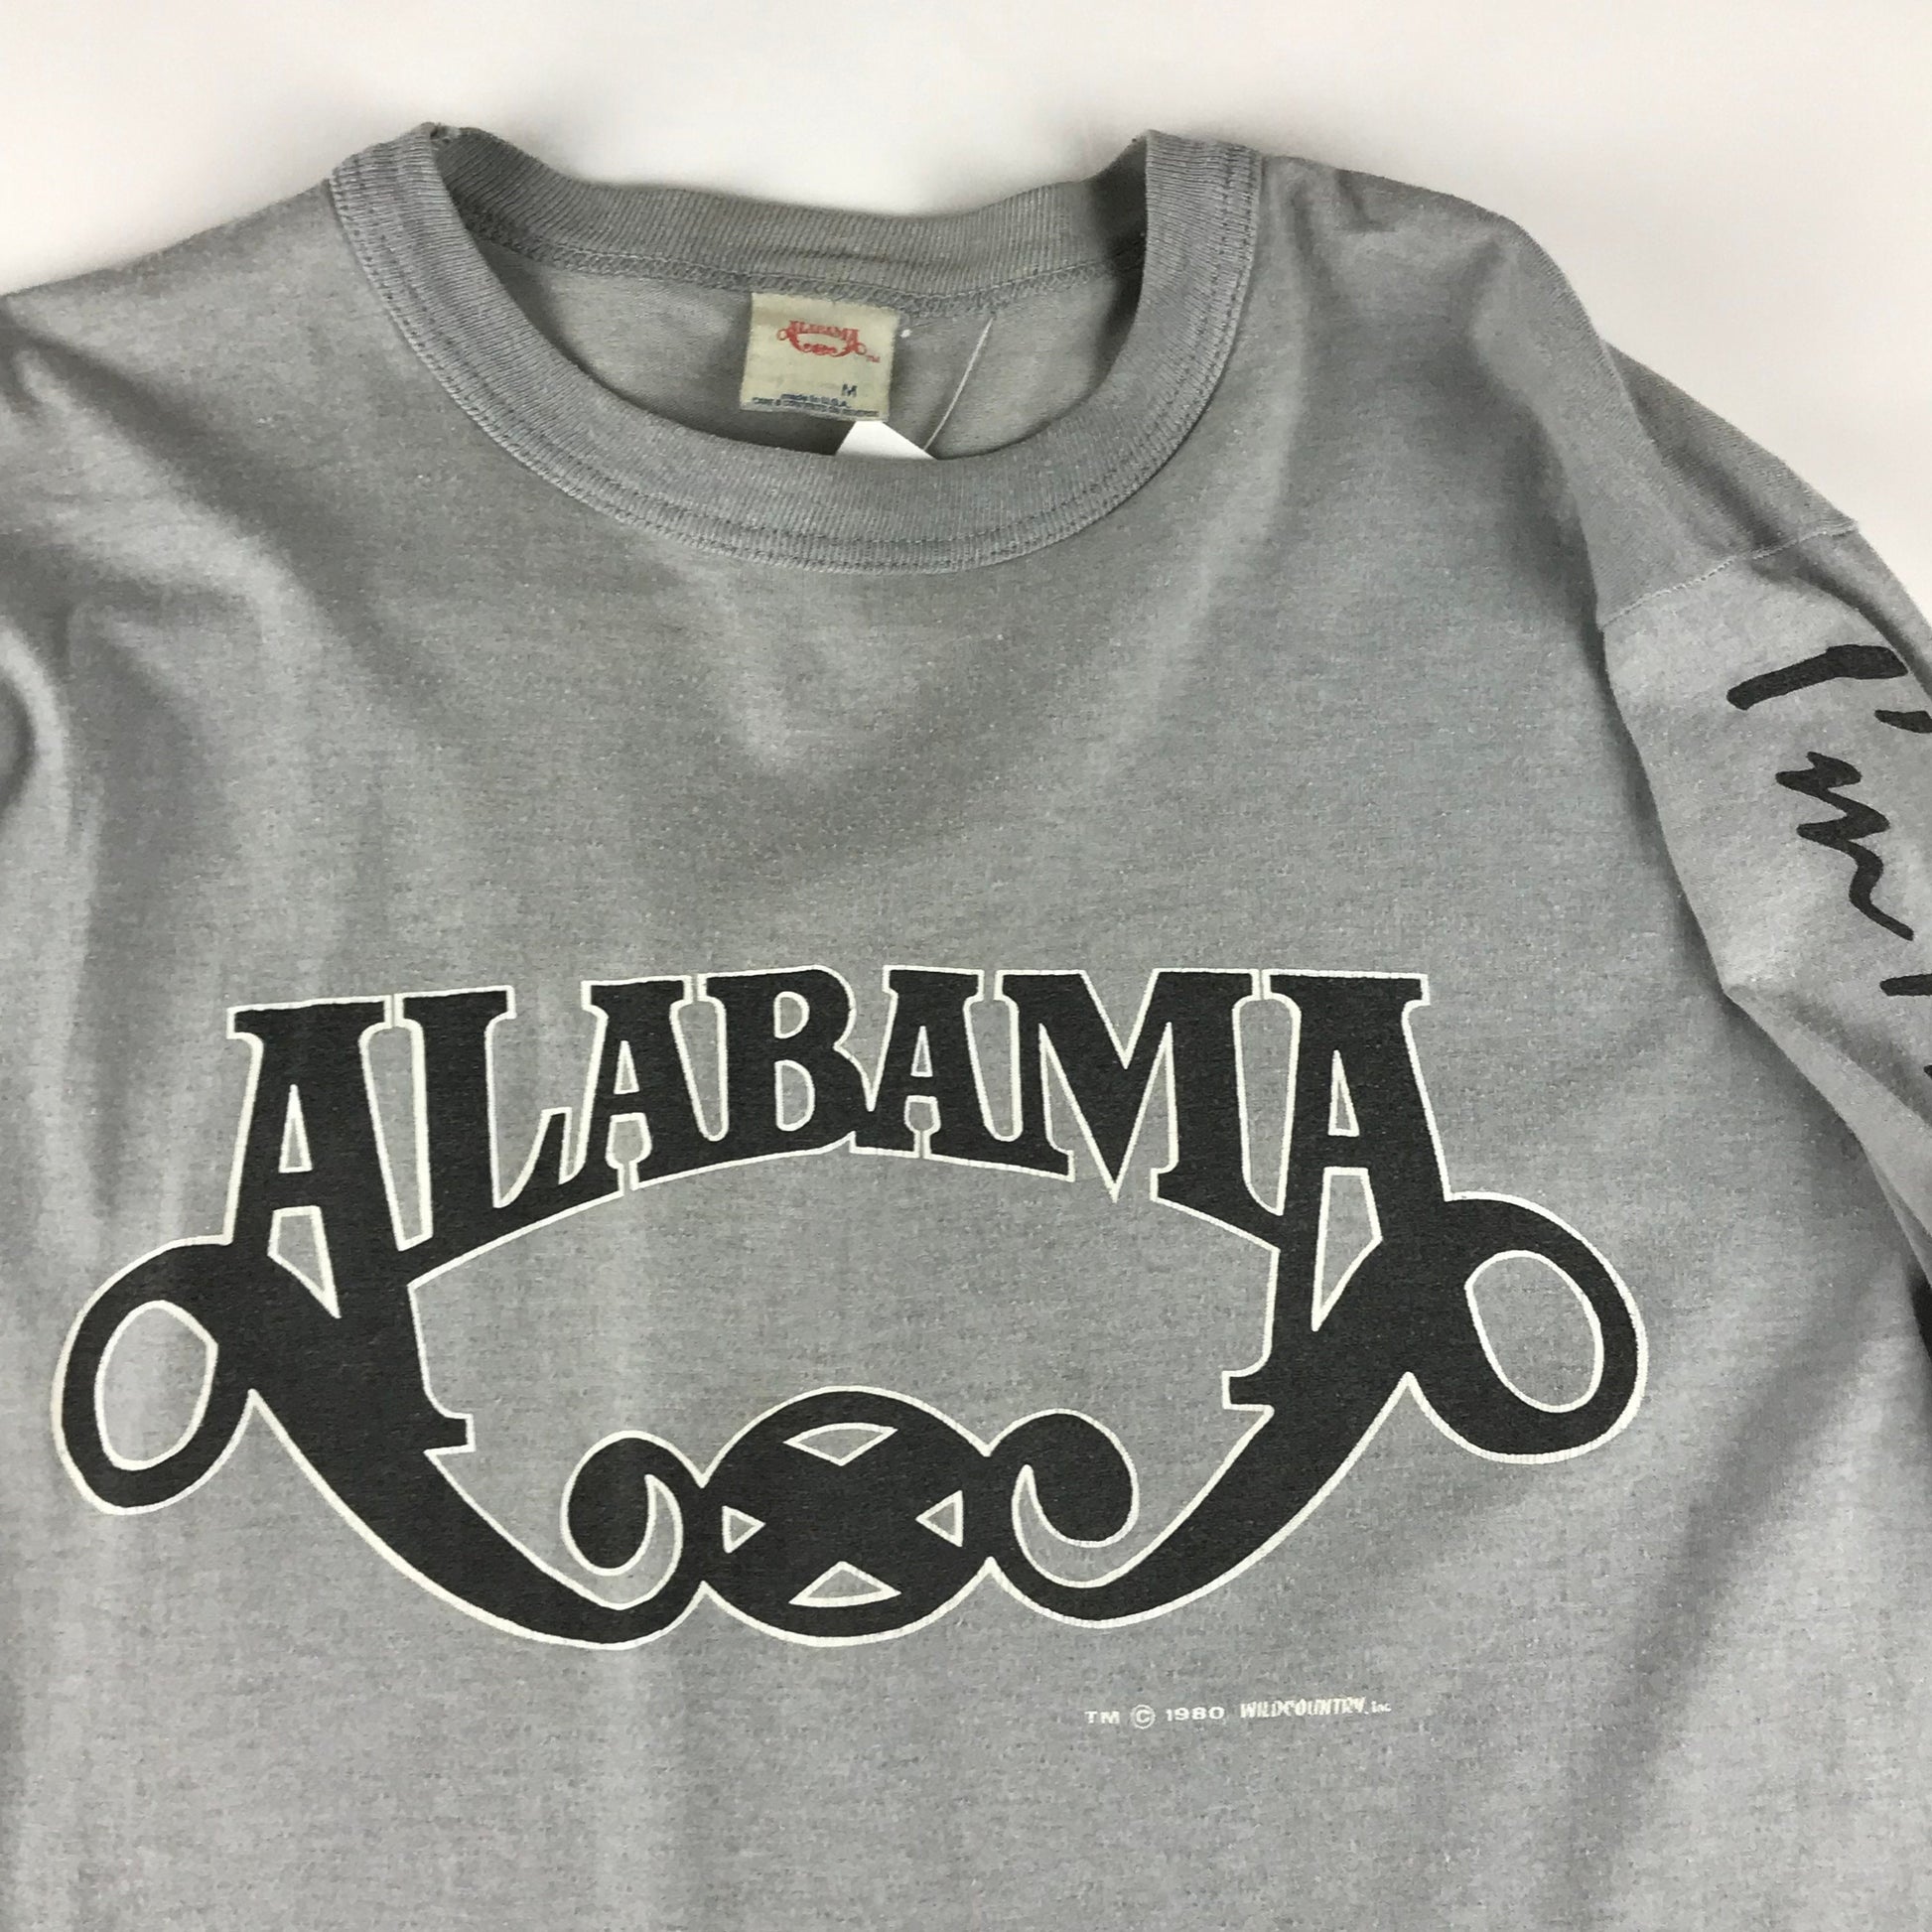 1980s Alabama 40 Hour Week Tour 1985 Longsleeve T-Shirt Made in USA Size S